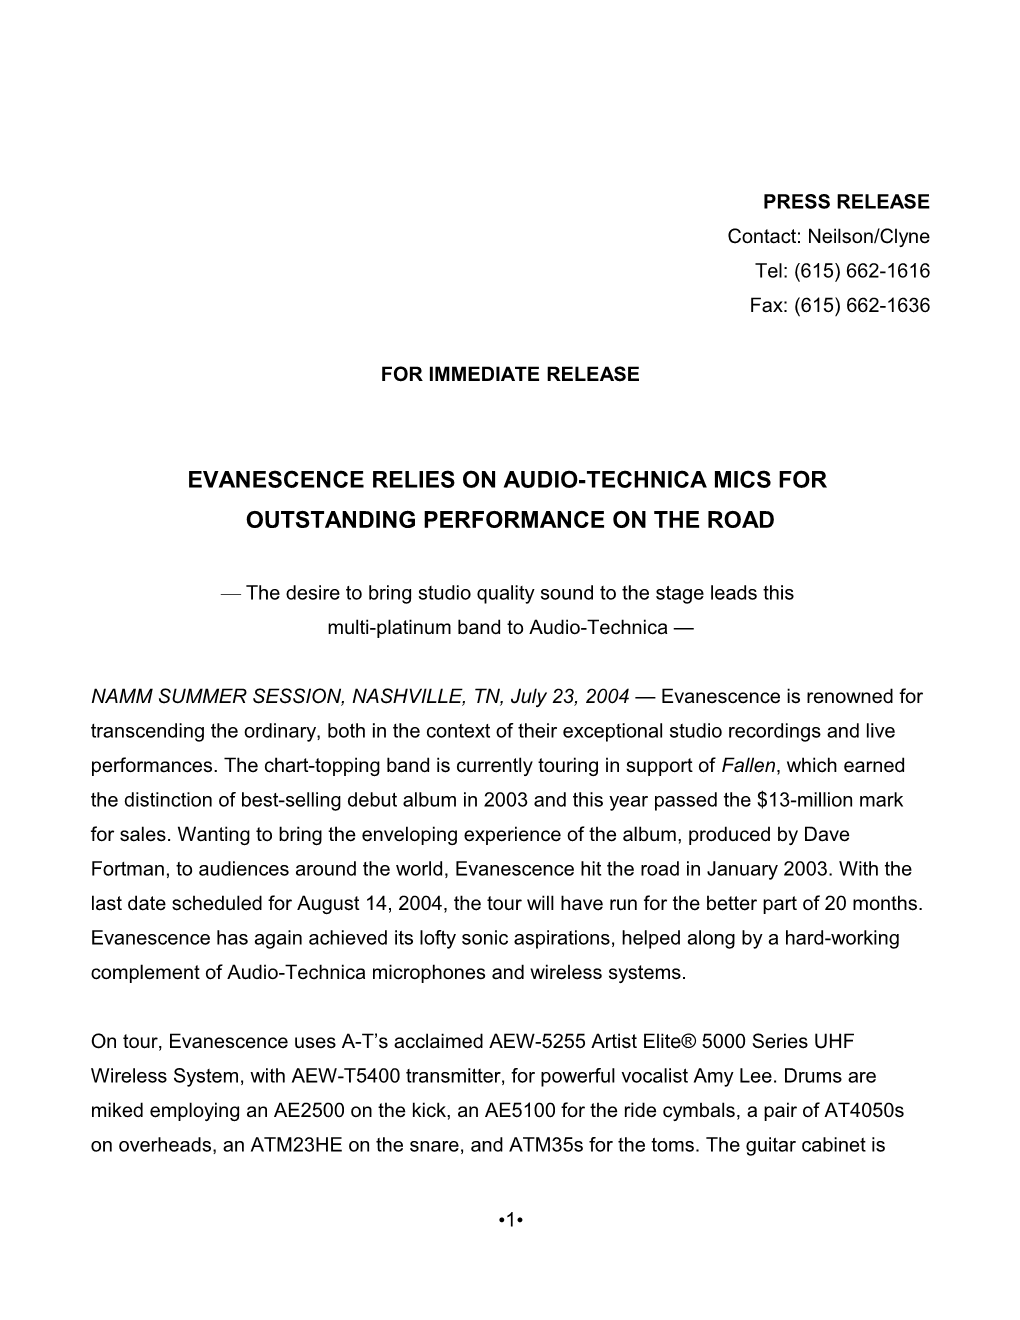 Evanescence Relies on Audio-Technica Mics For